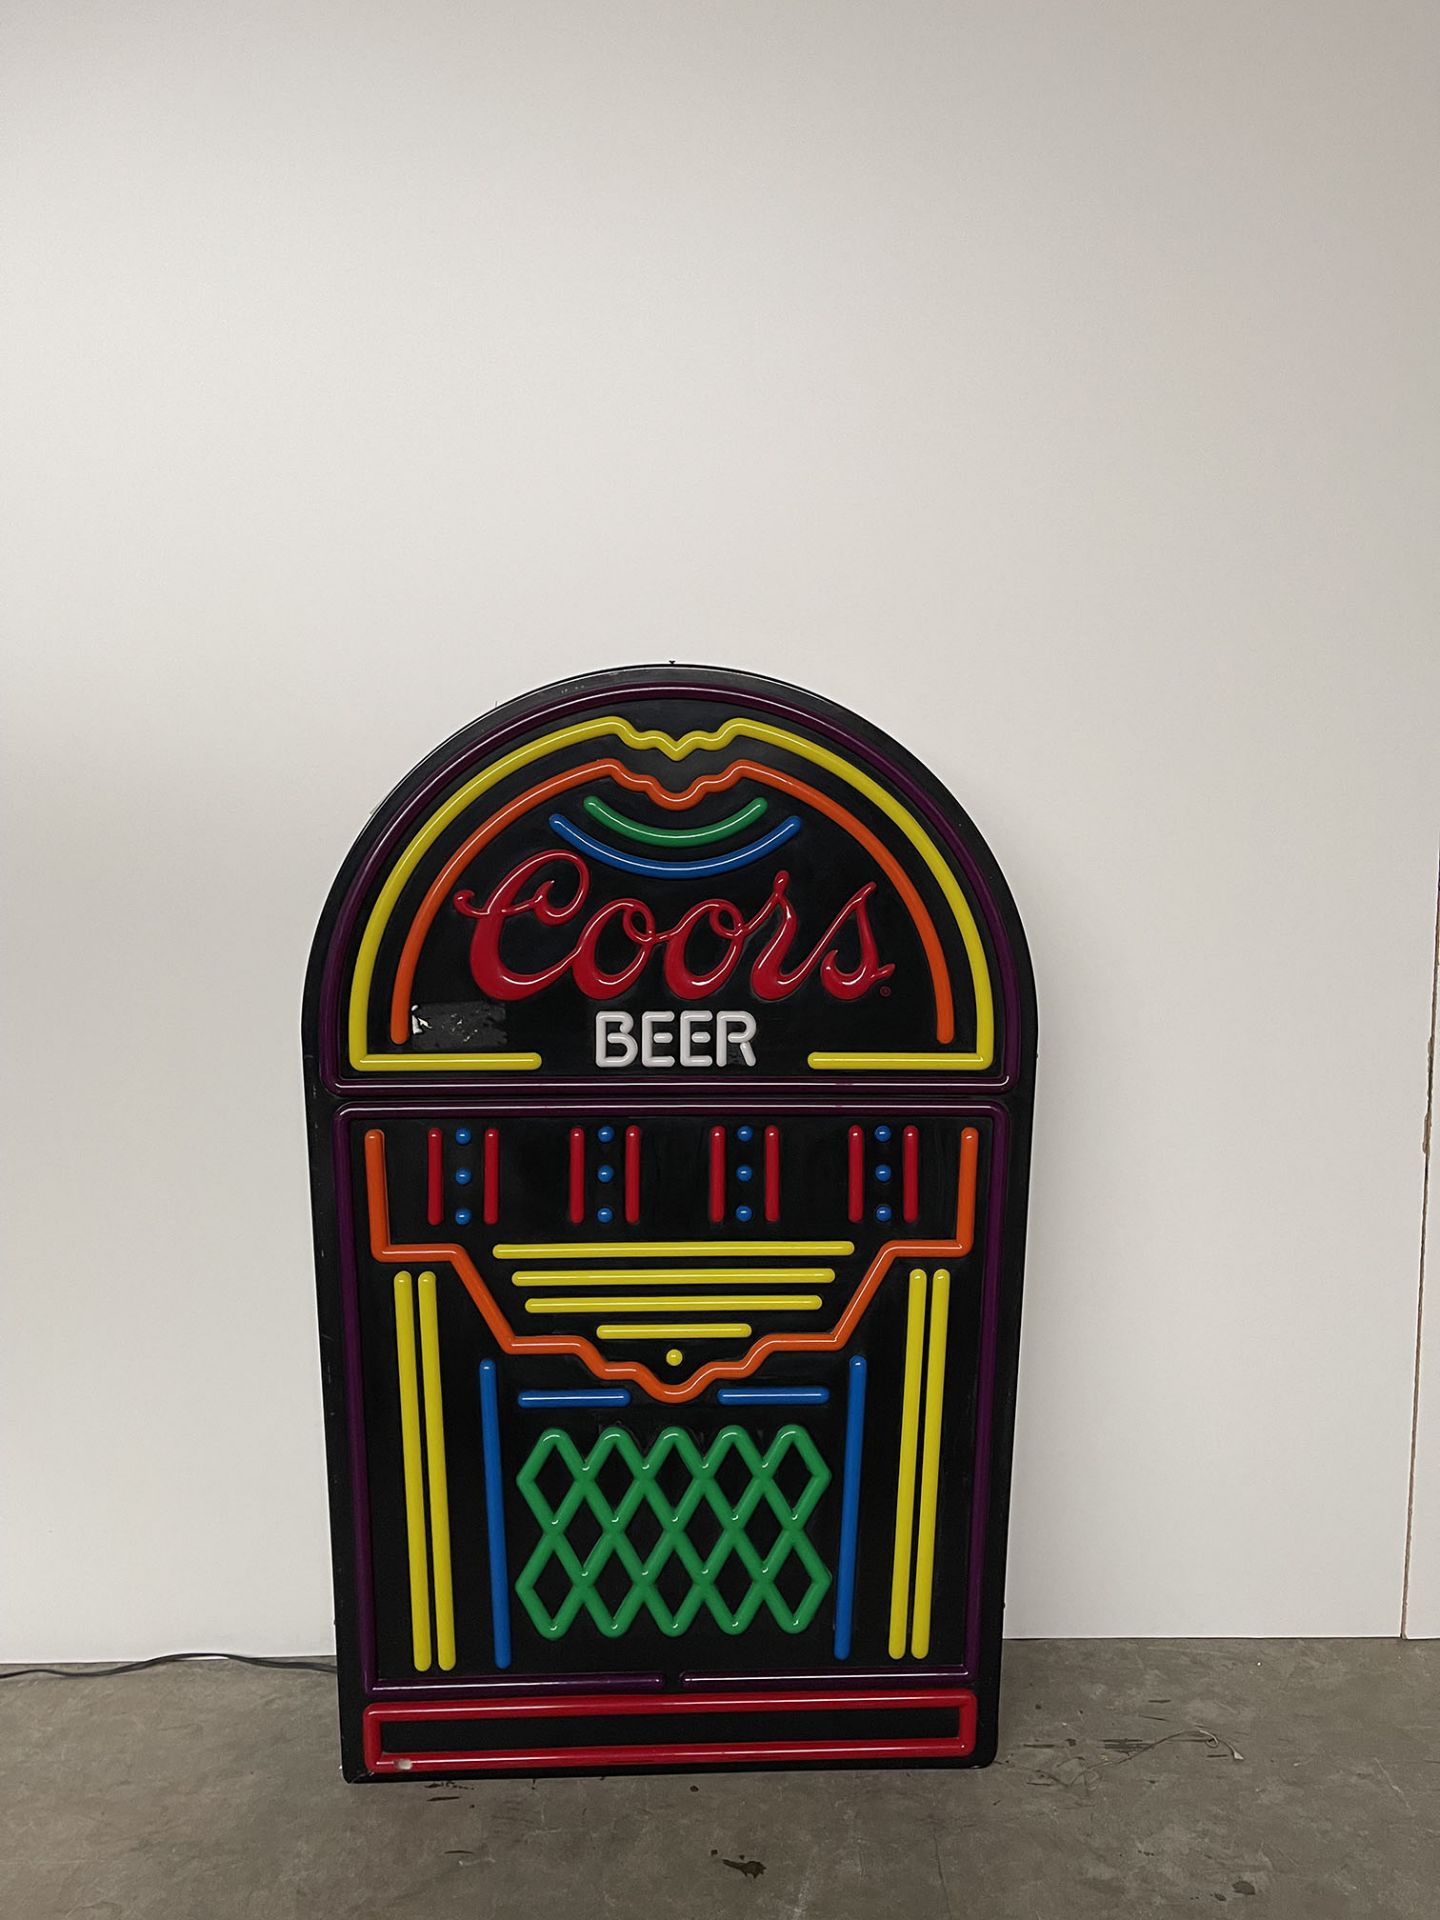 Coors Beer Jukebox Shaped Light Up Sign - Image 3 of 3